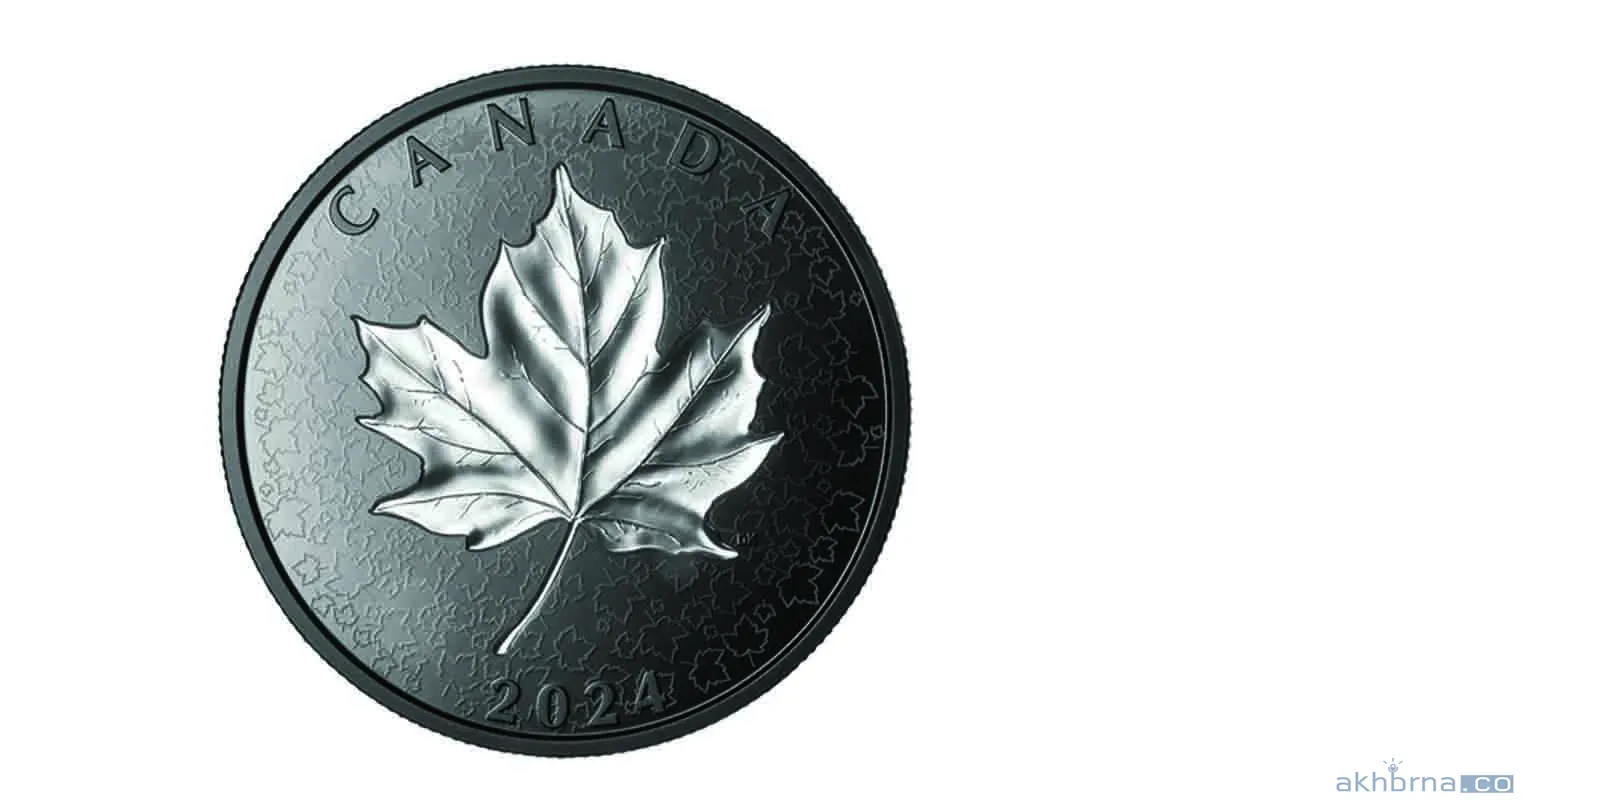 Canadian coin